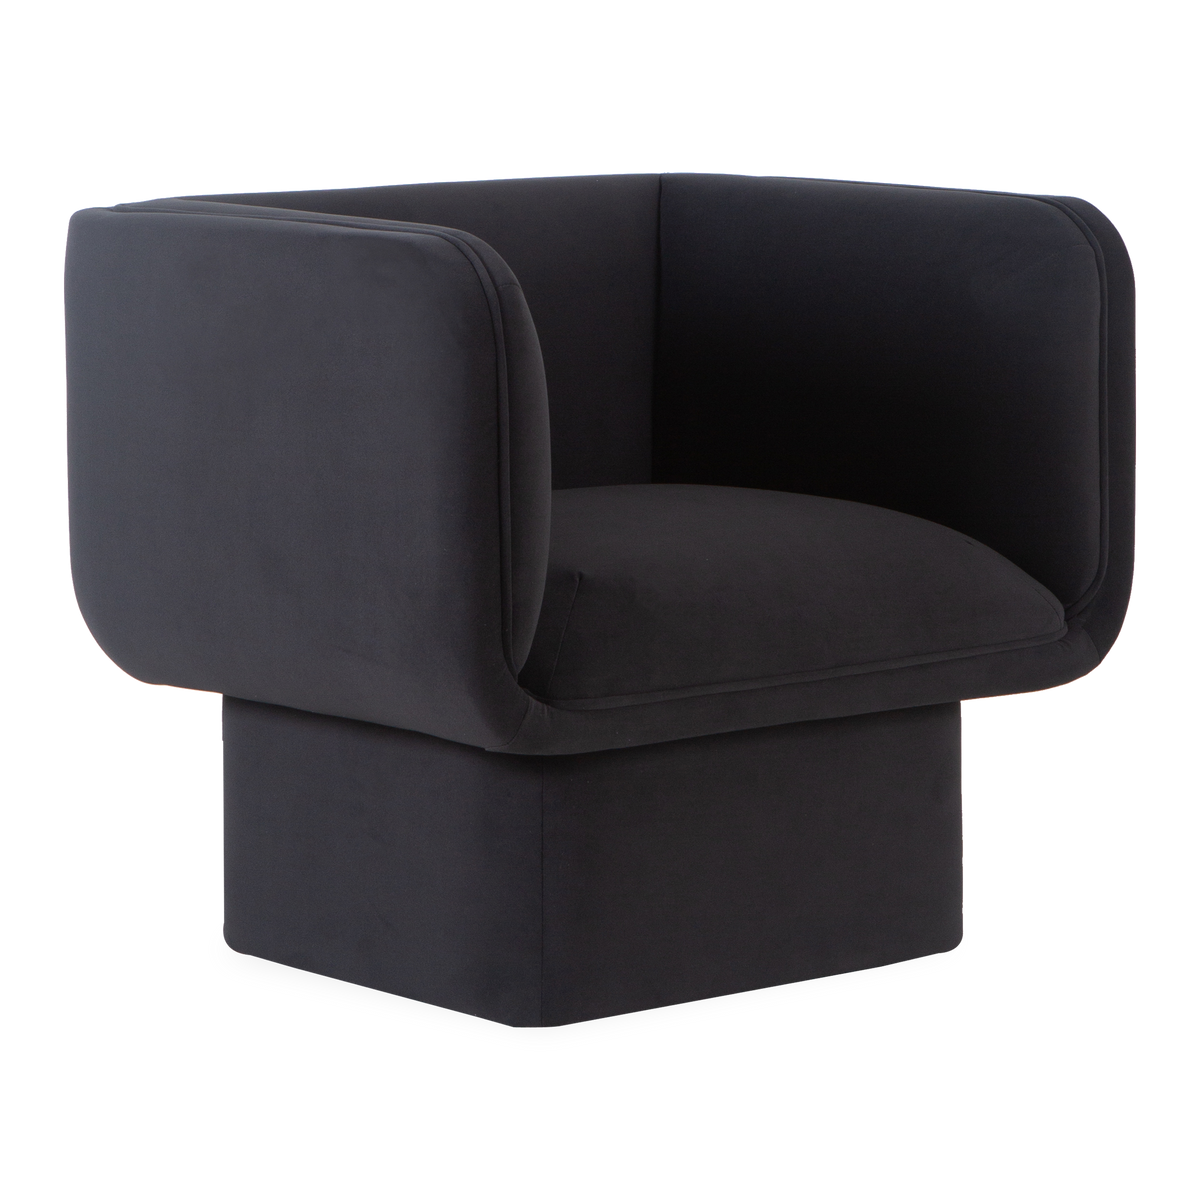 Inspired by a vintage Italian design from the 1970s, the Roma Lounge Chair sits upon a square base and features a generously cushioned seat and supportive back.